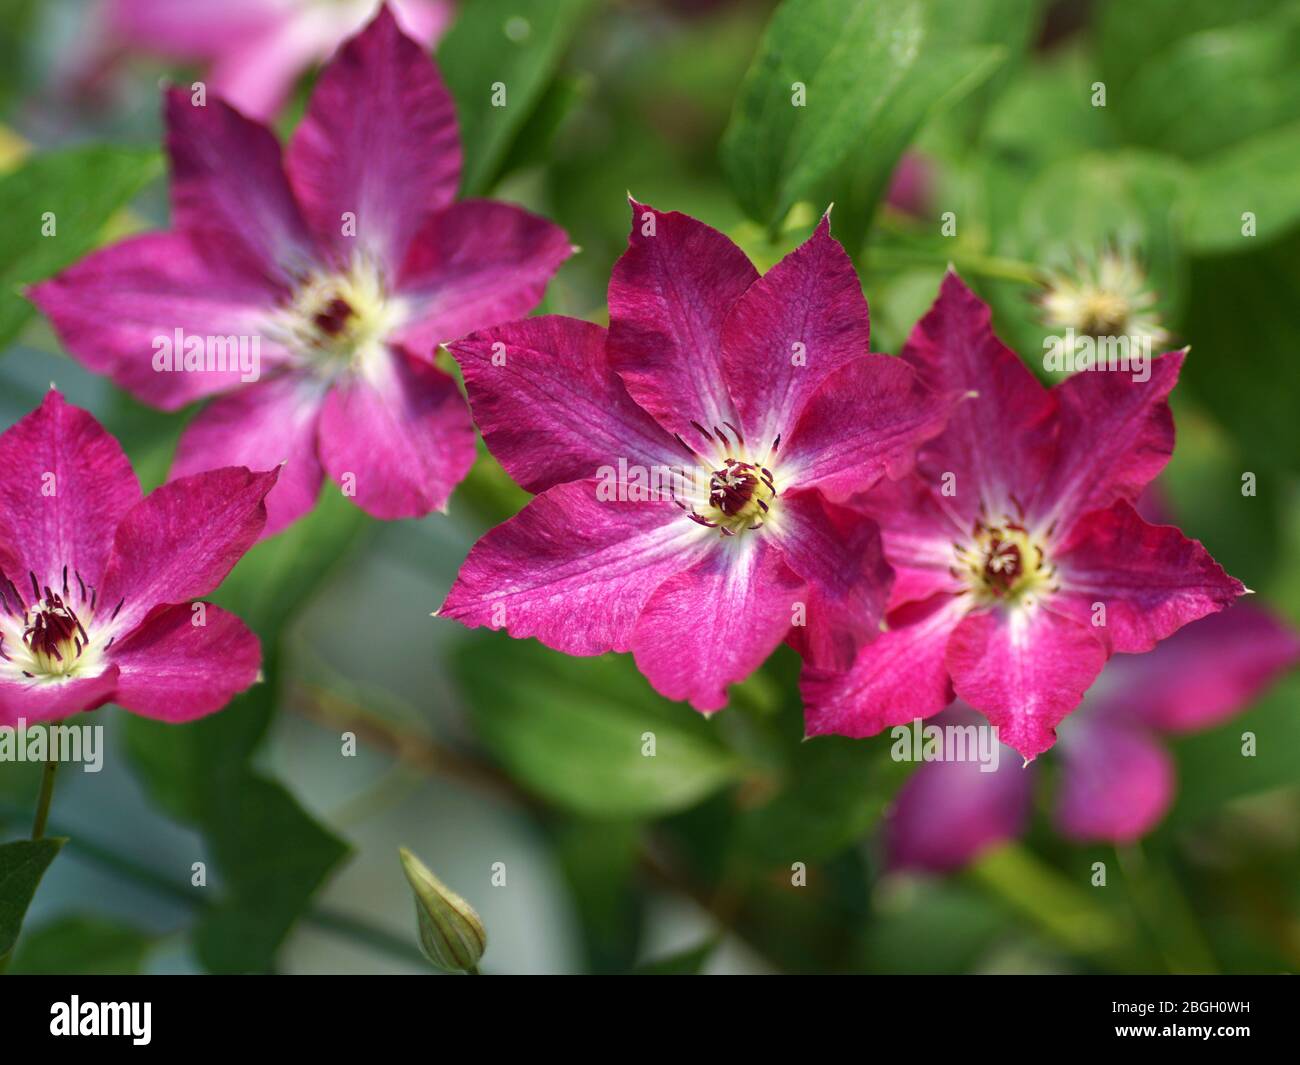 Beautiful summer flowers in a vertical garden gardening. Many raspberry flowers close up. Flowers Clematis varieties Viva Polonia Stock Photo